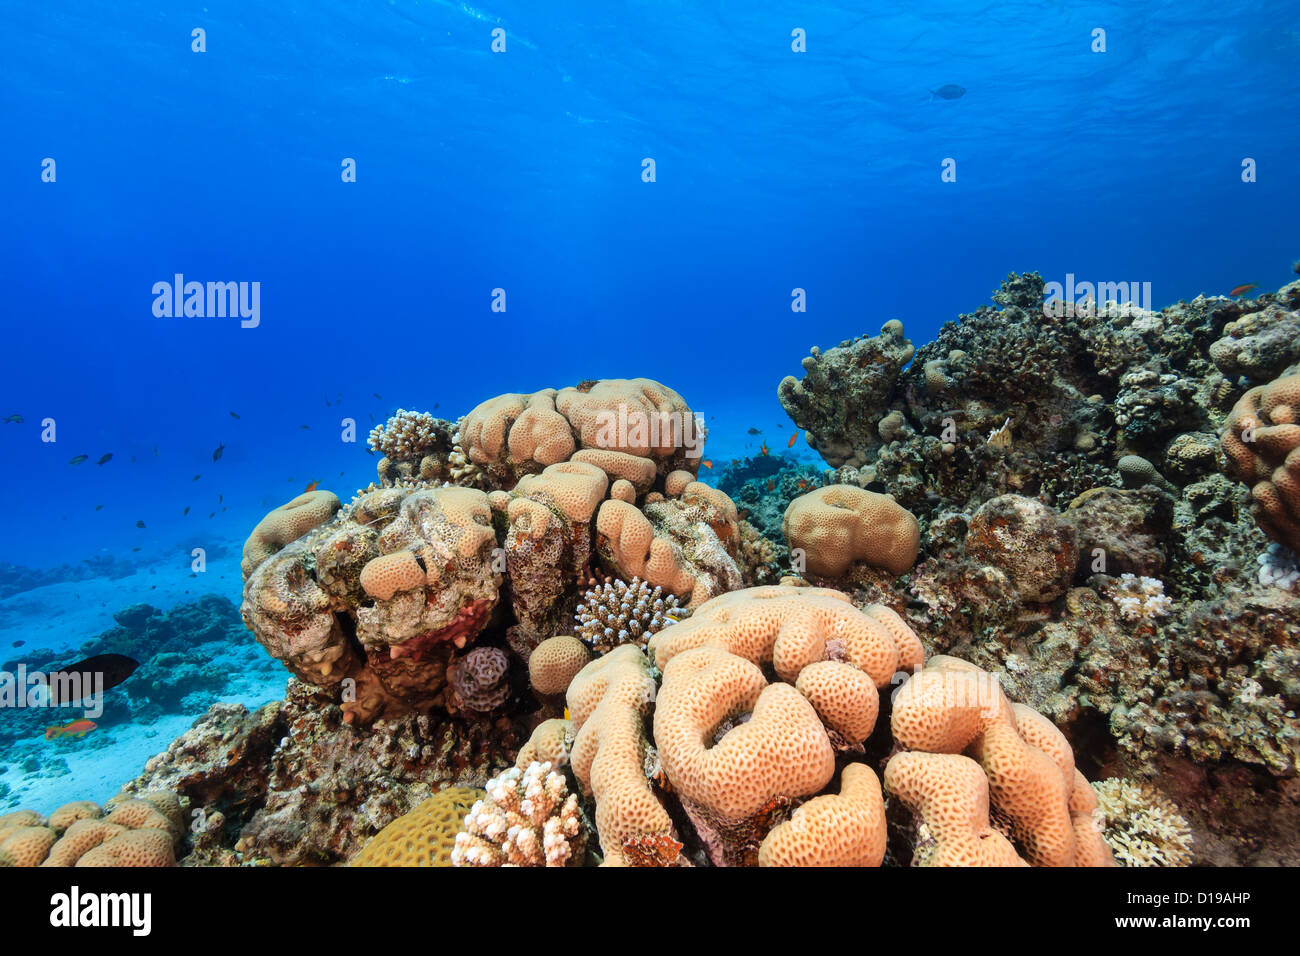 Hard corals and tropical fish on a coral reef in the Red Sea Stock Photo